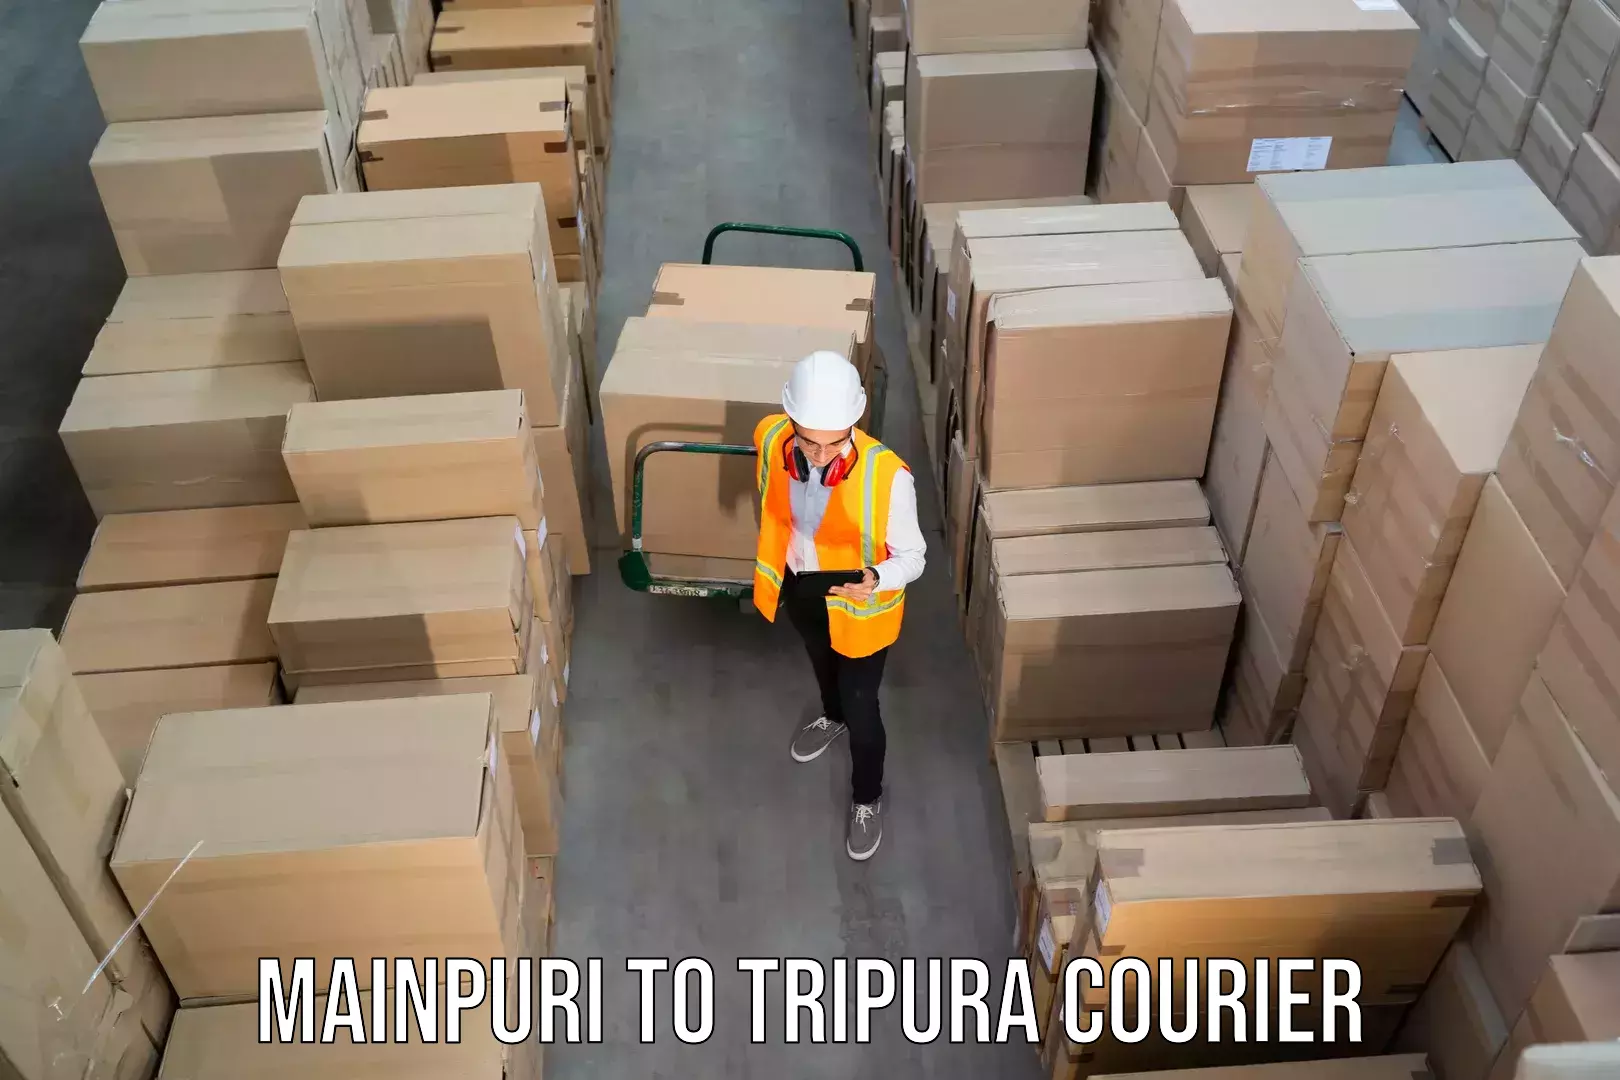 Fast delivery service Mainpuri to Tripura